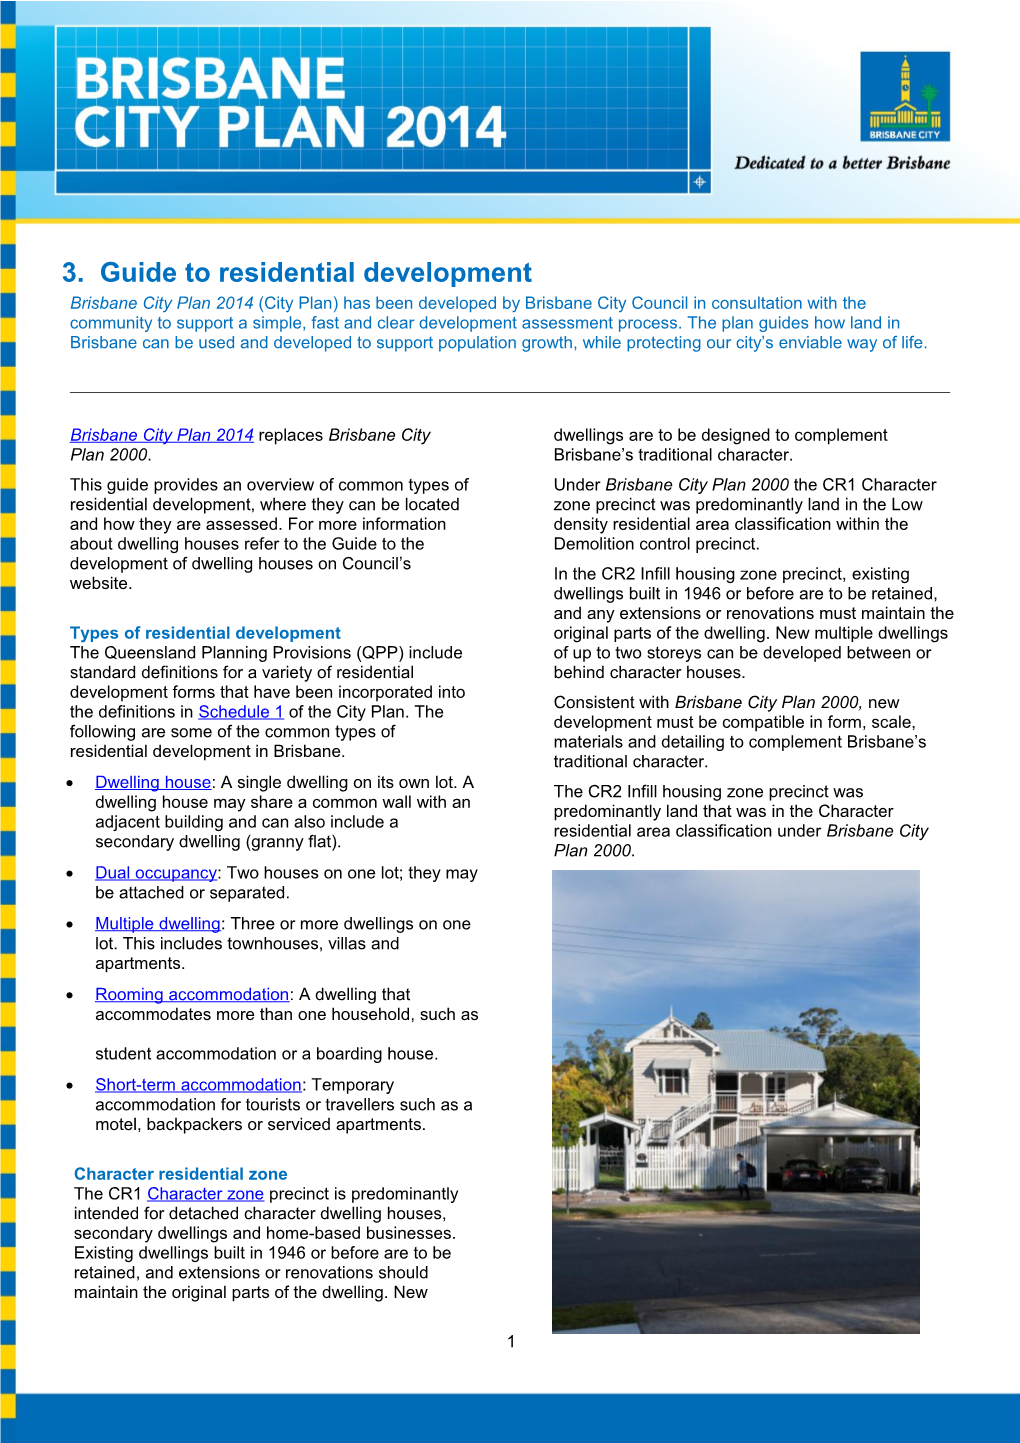 3. Guide to Residential Development